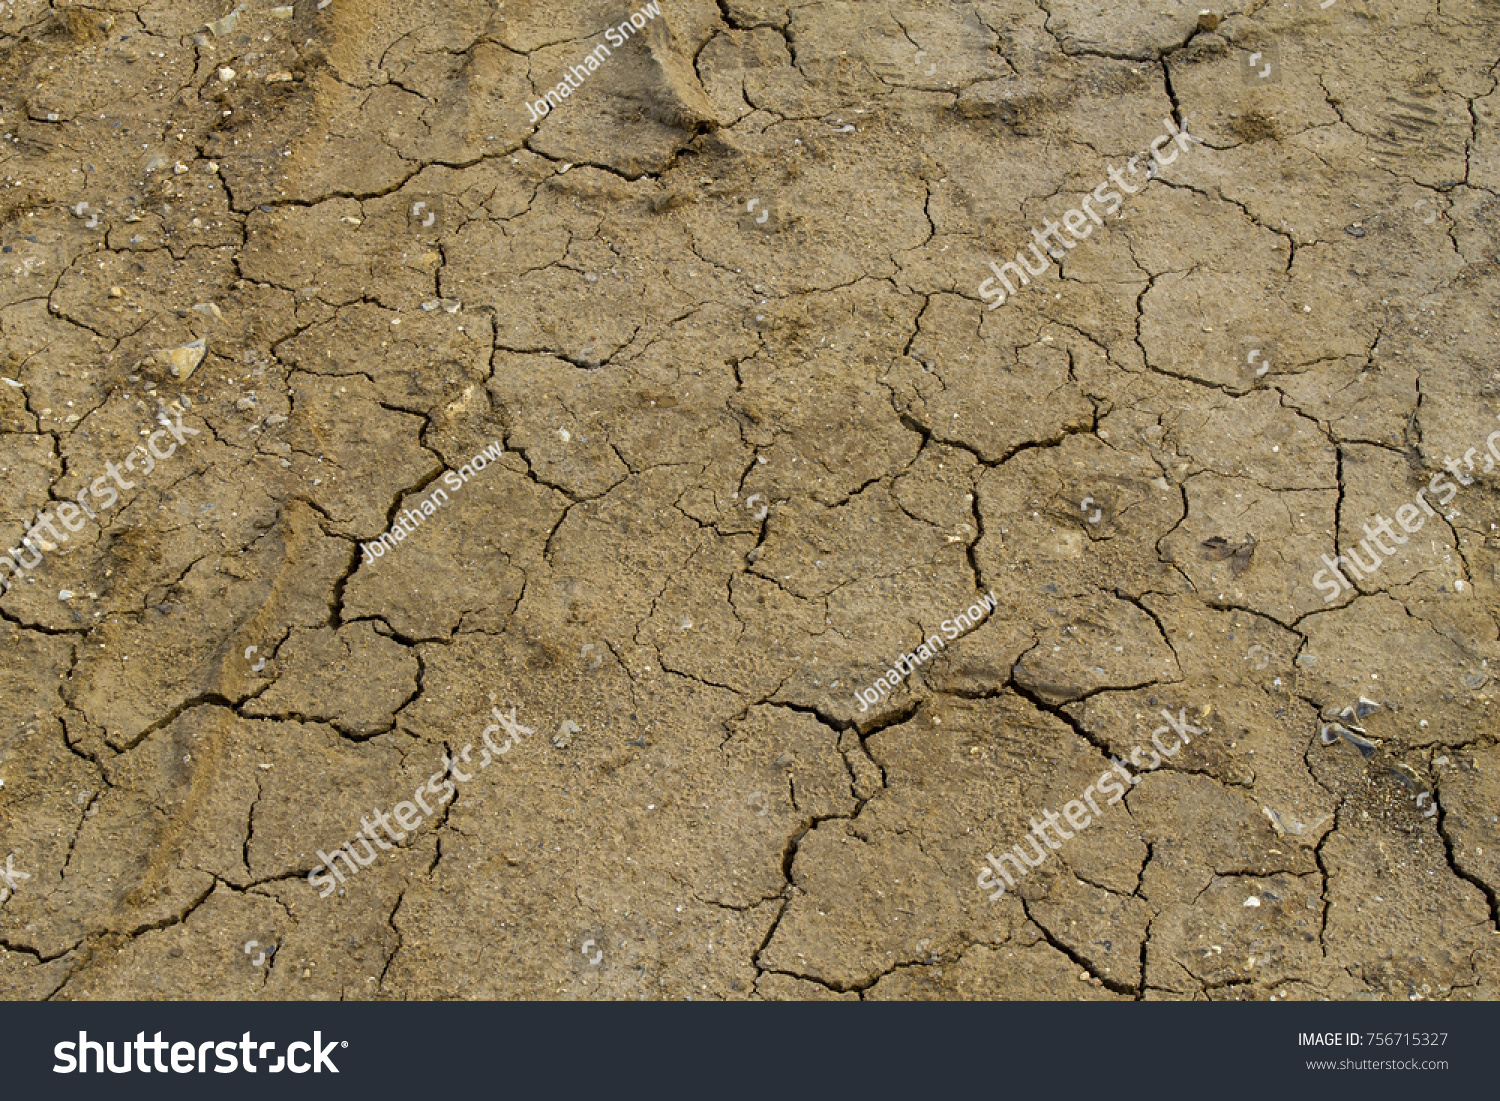 dry, cracked and compacted soil #756715327